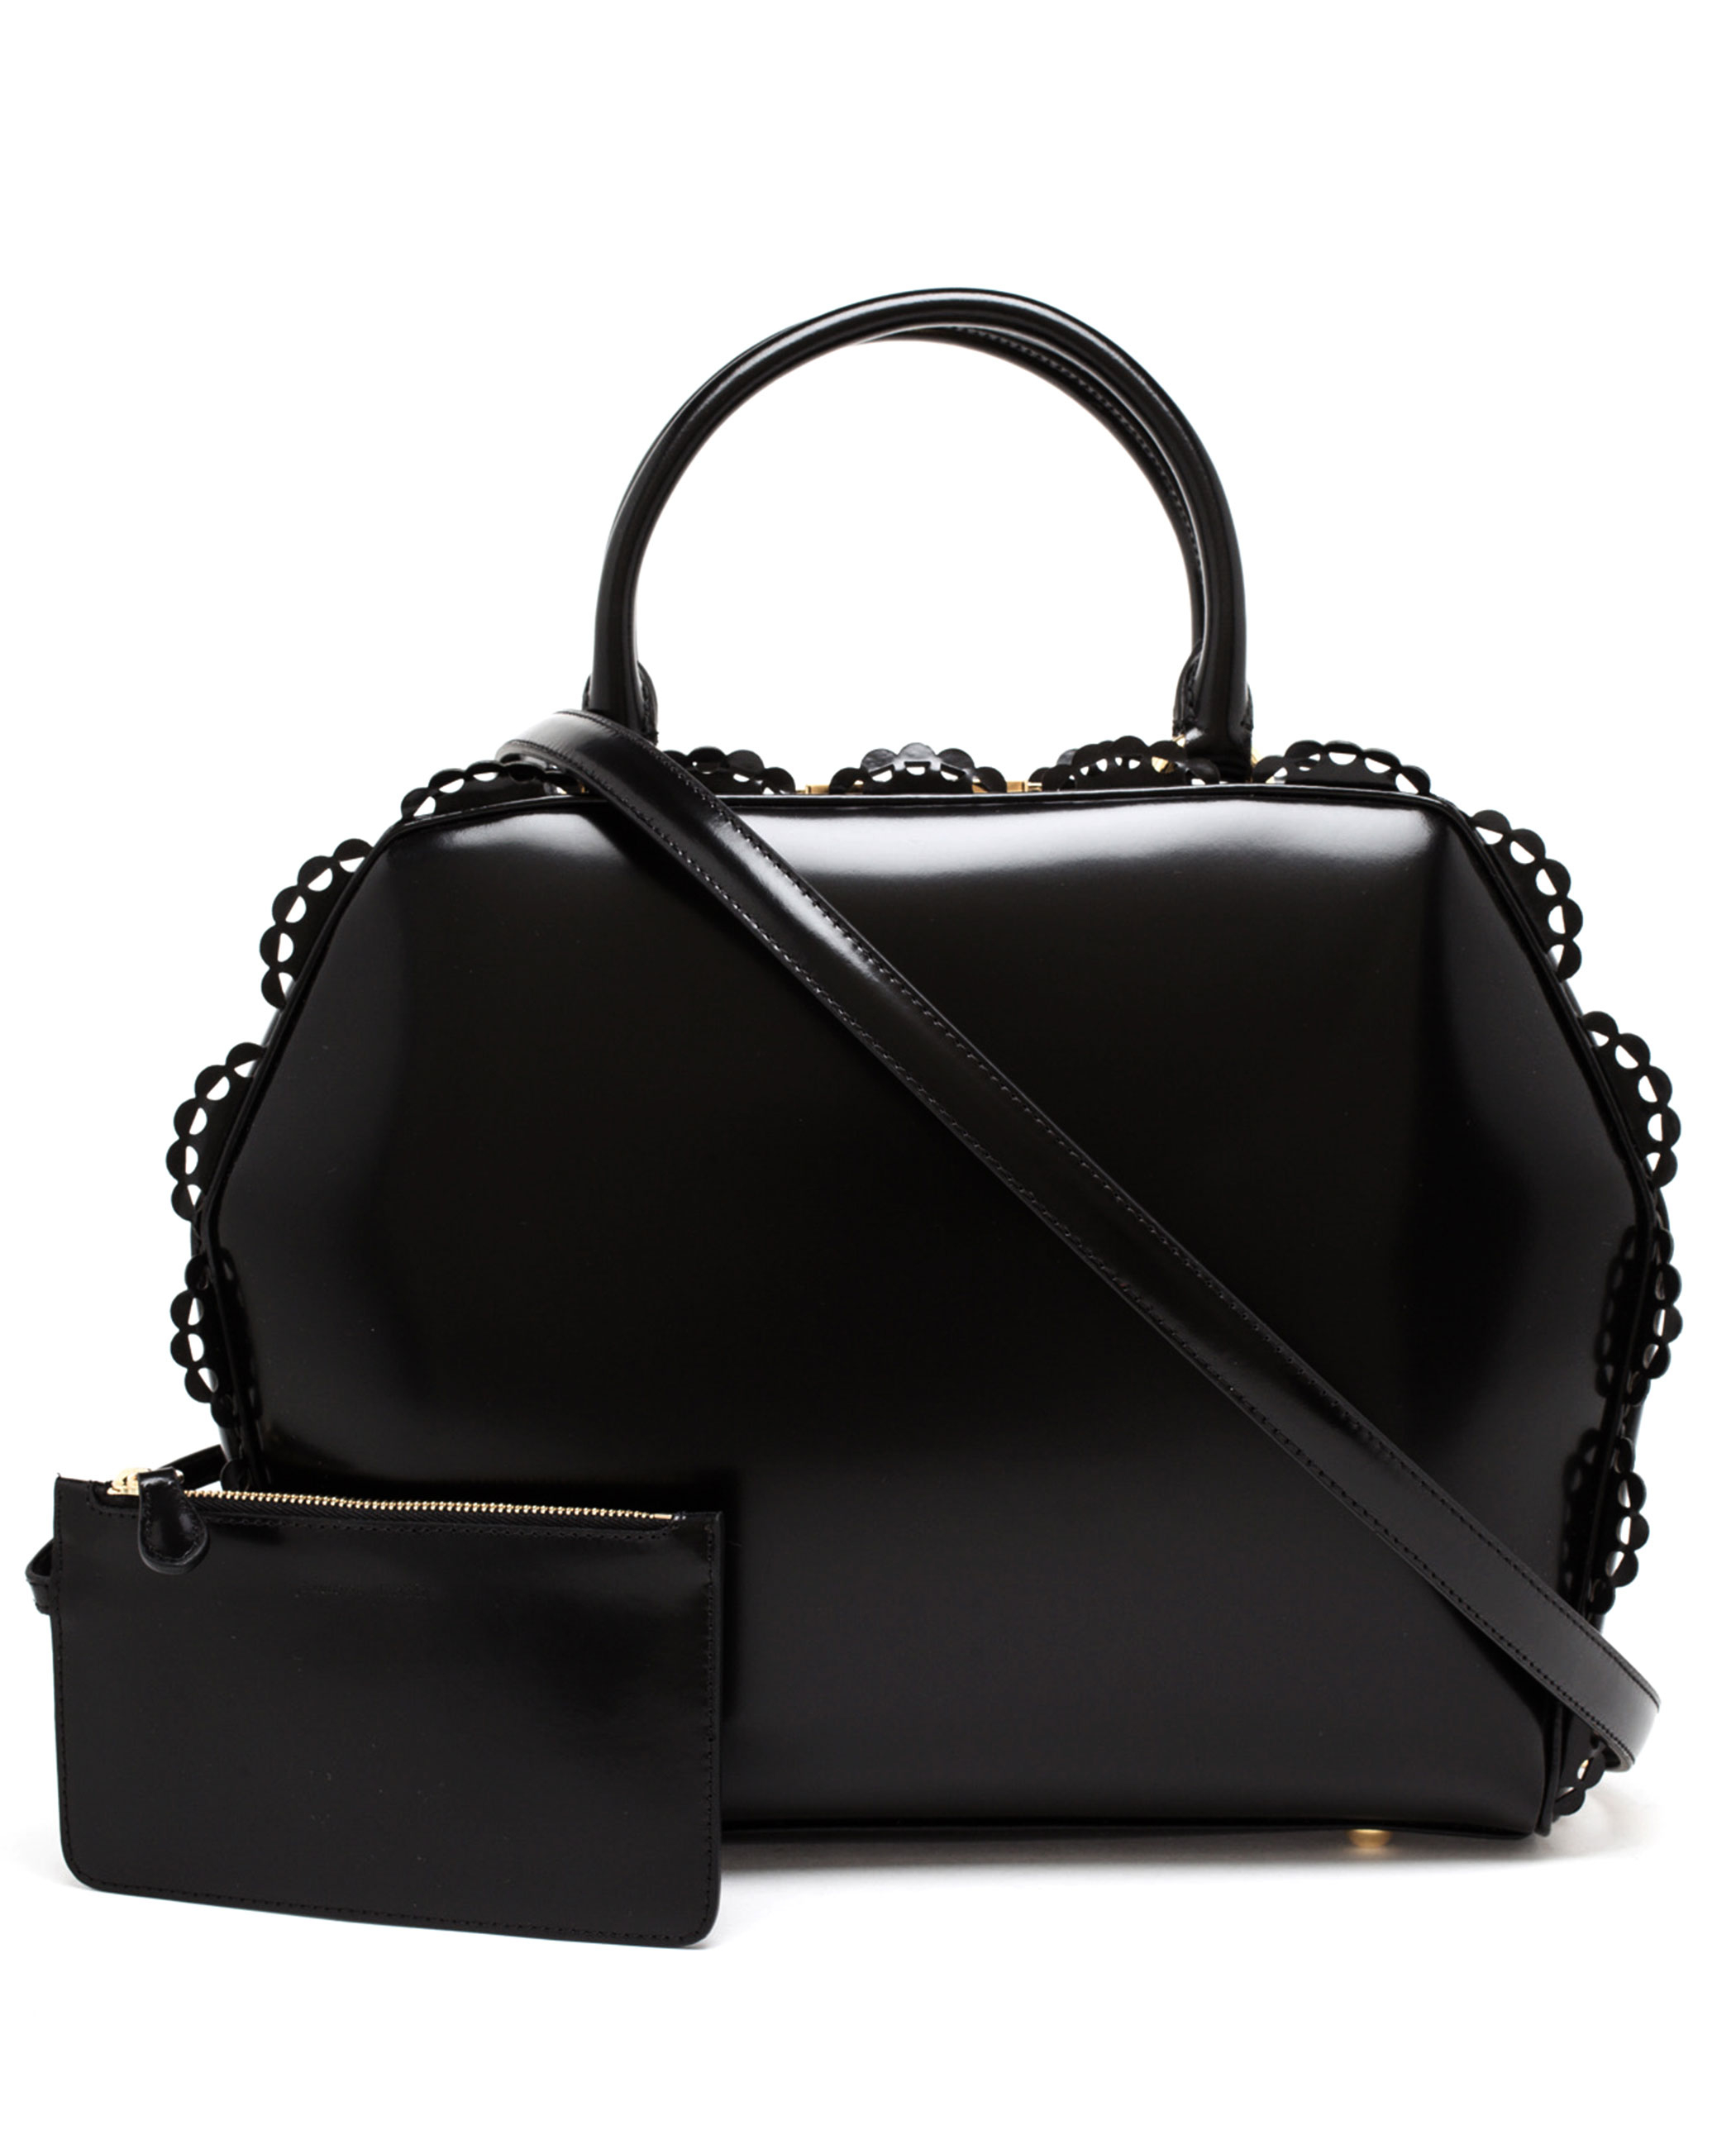 Lyst - Simone Rocha Scalloped Patent Leather Doctors Bag in Black